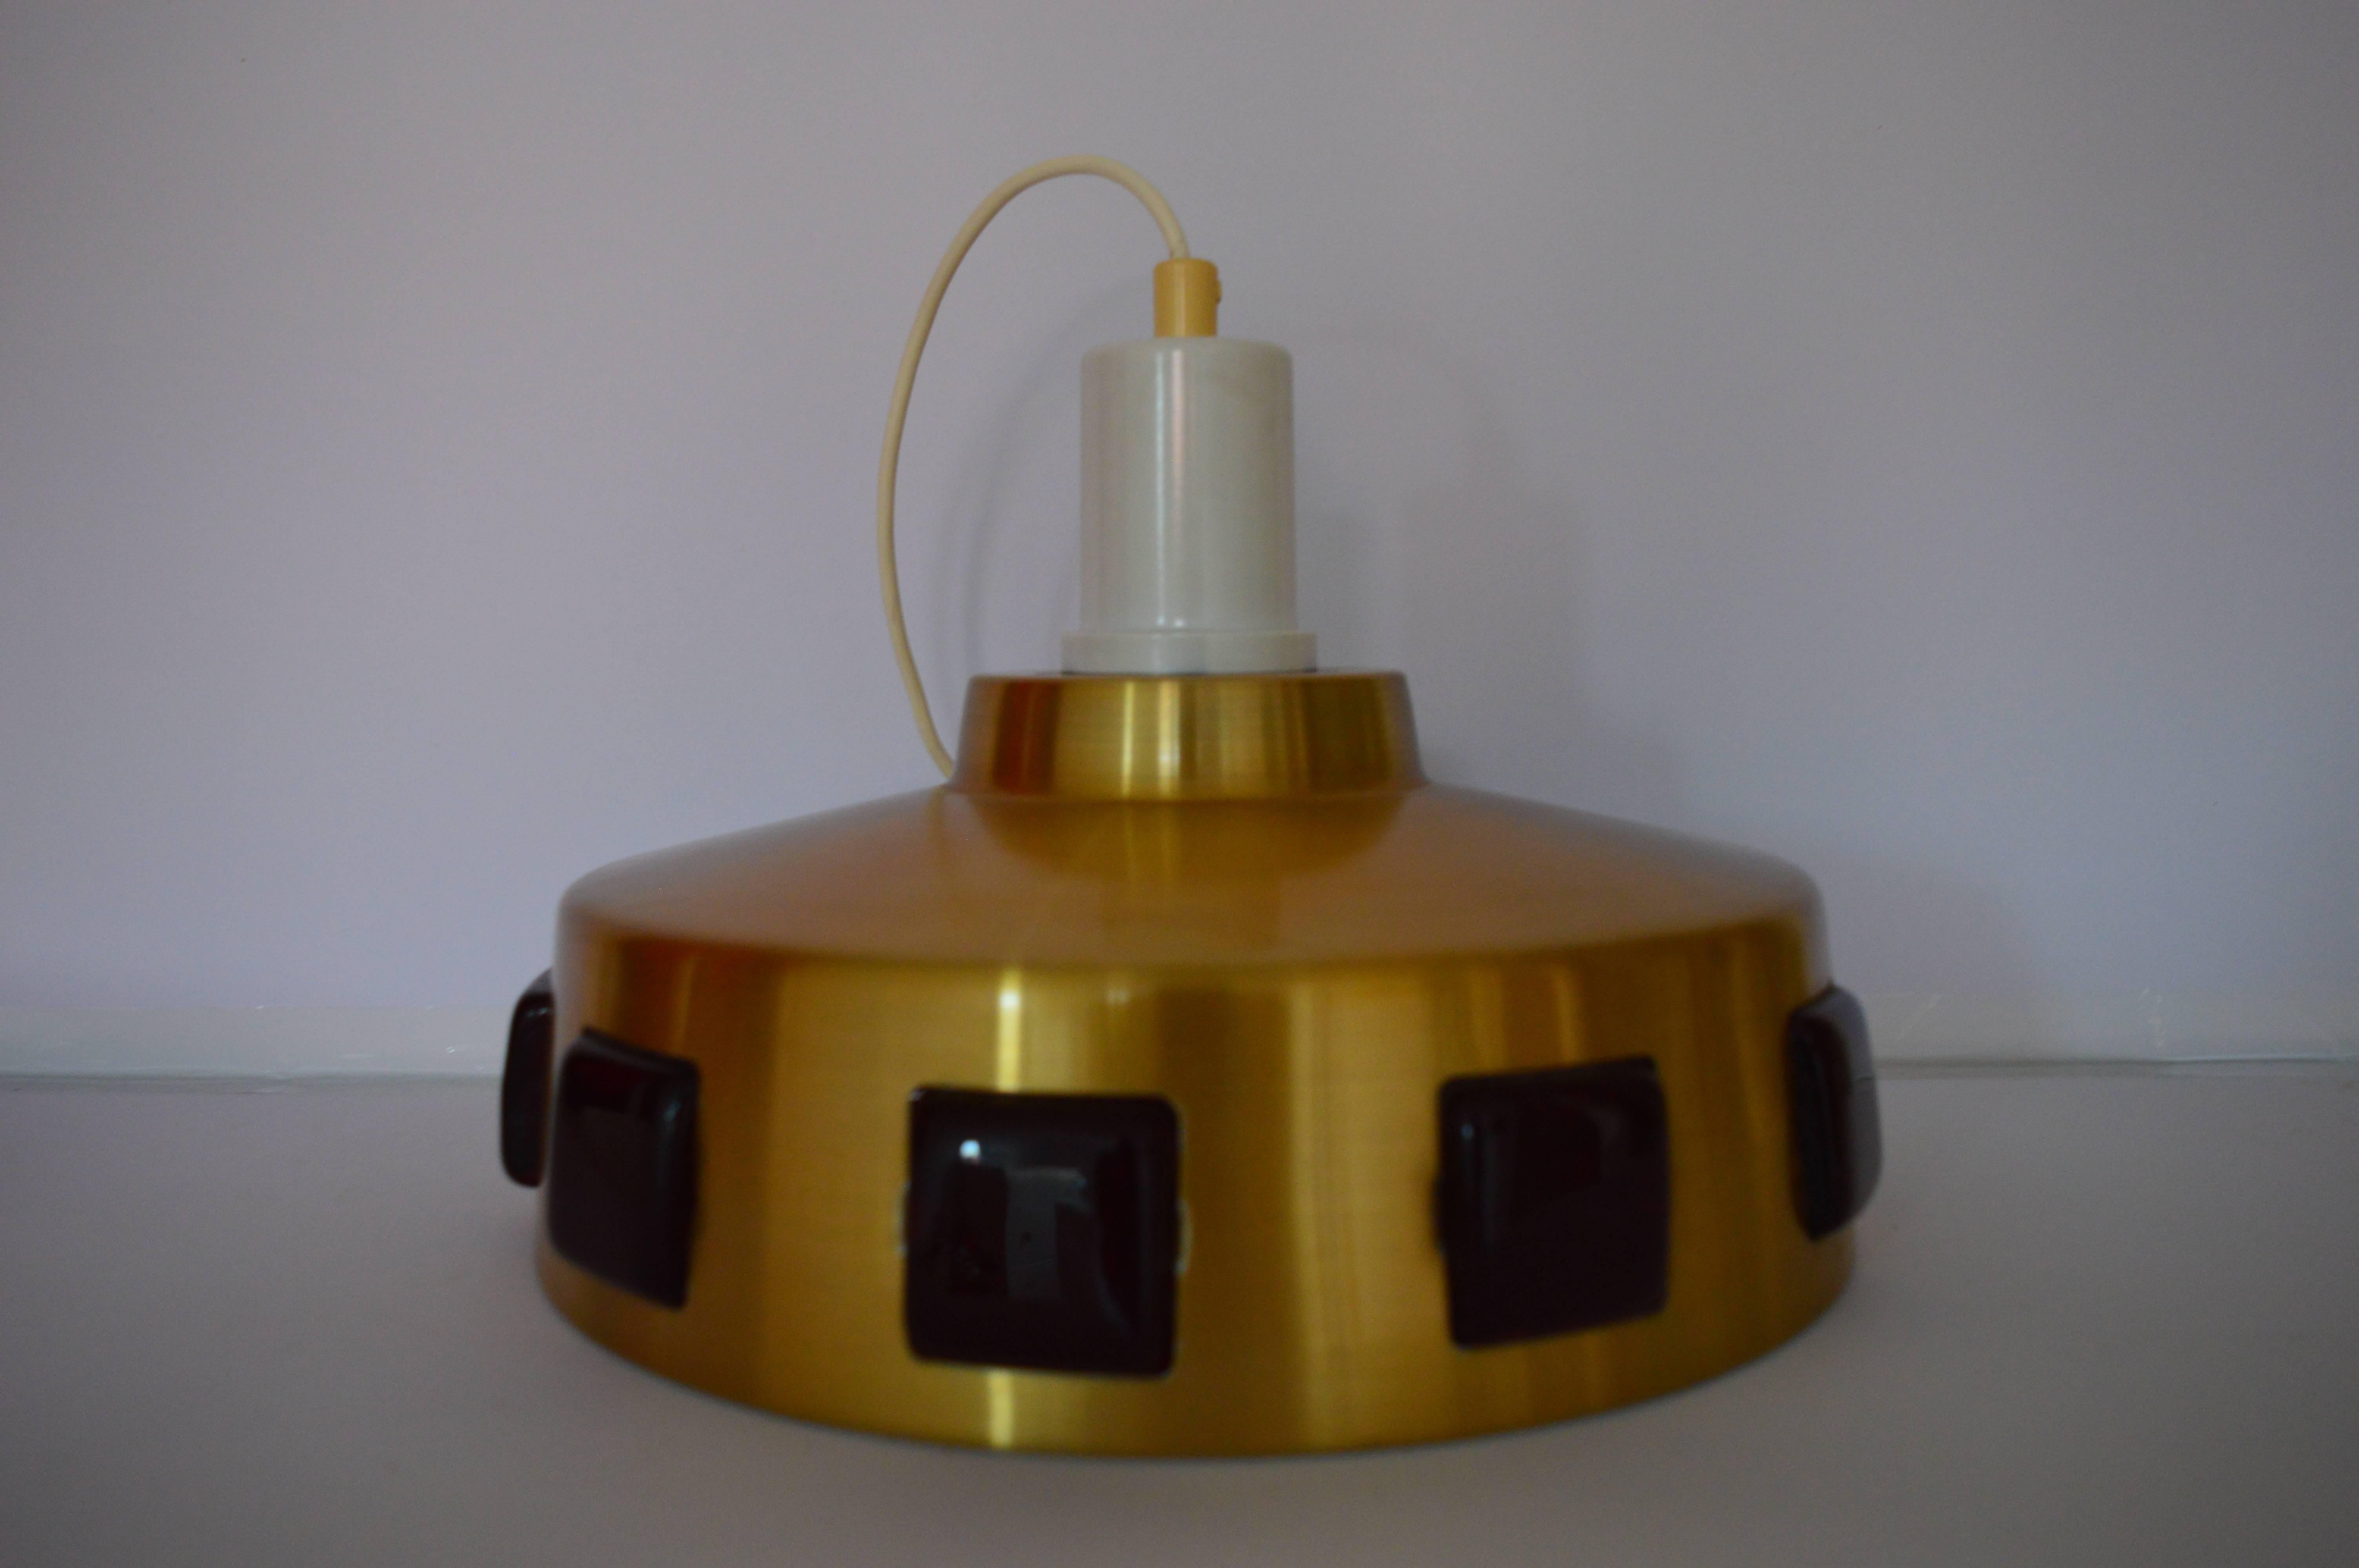 His ceiling lamp was produced in Sweden during the 1960s.
Very good condition.